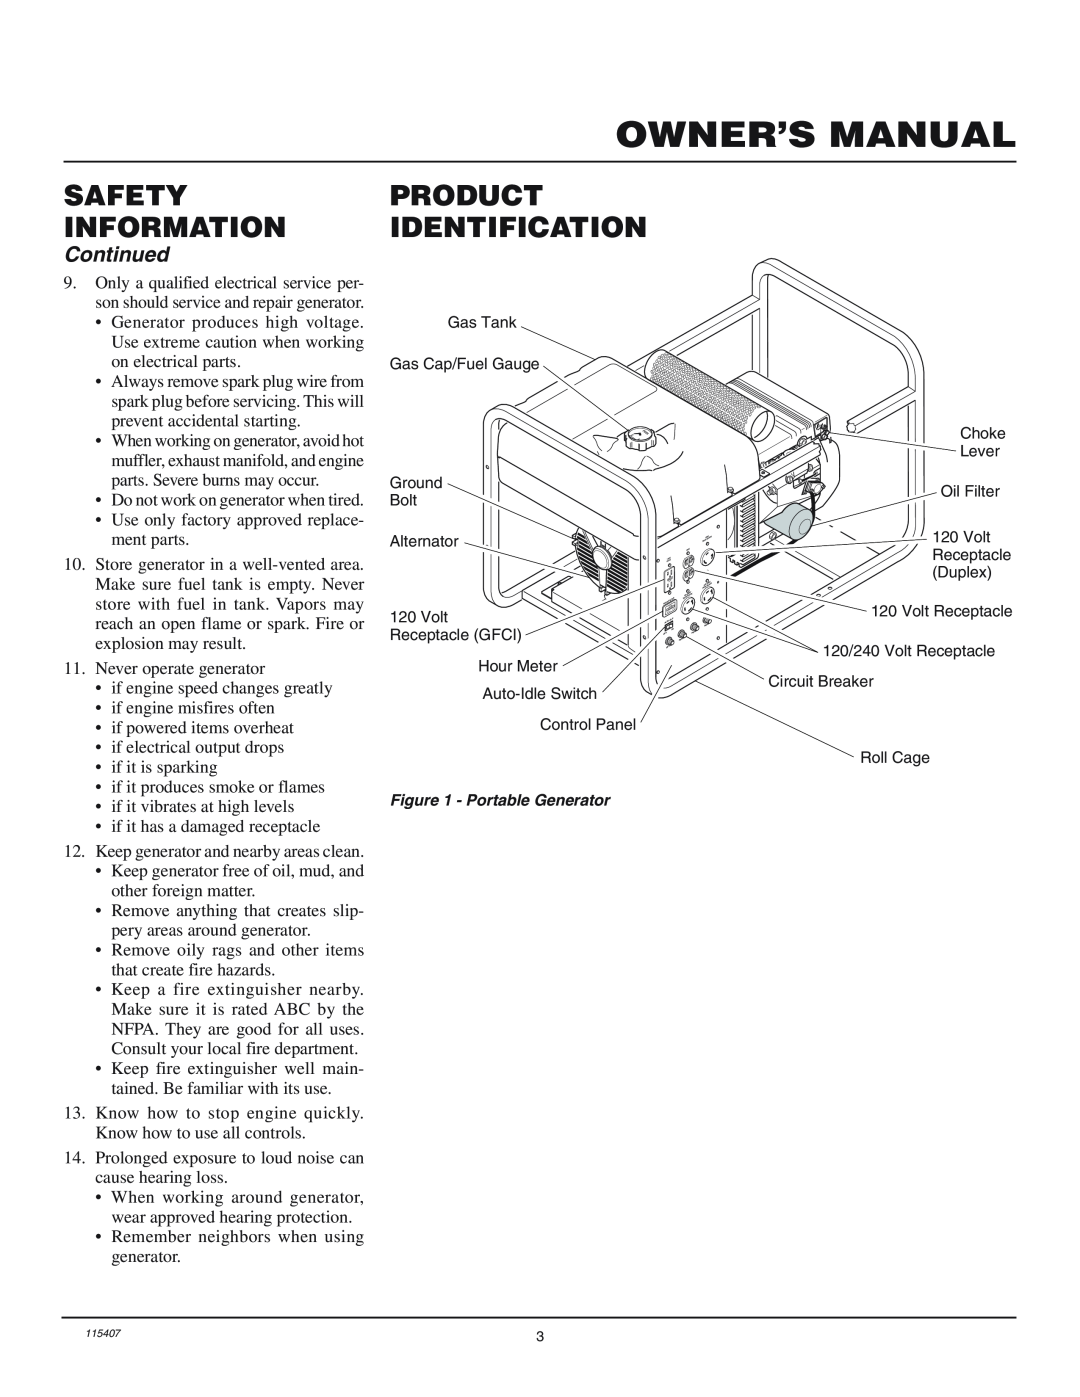 Master Lock MGH8500IE installation manual Owner’S Manual, Product Identification, Continued, Safety Information 